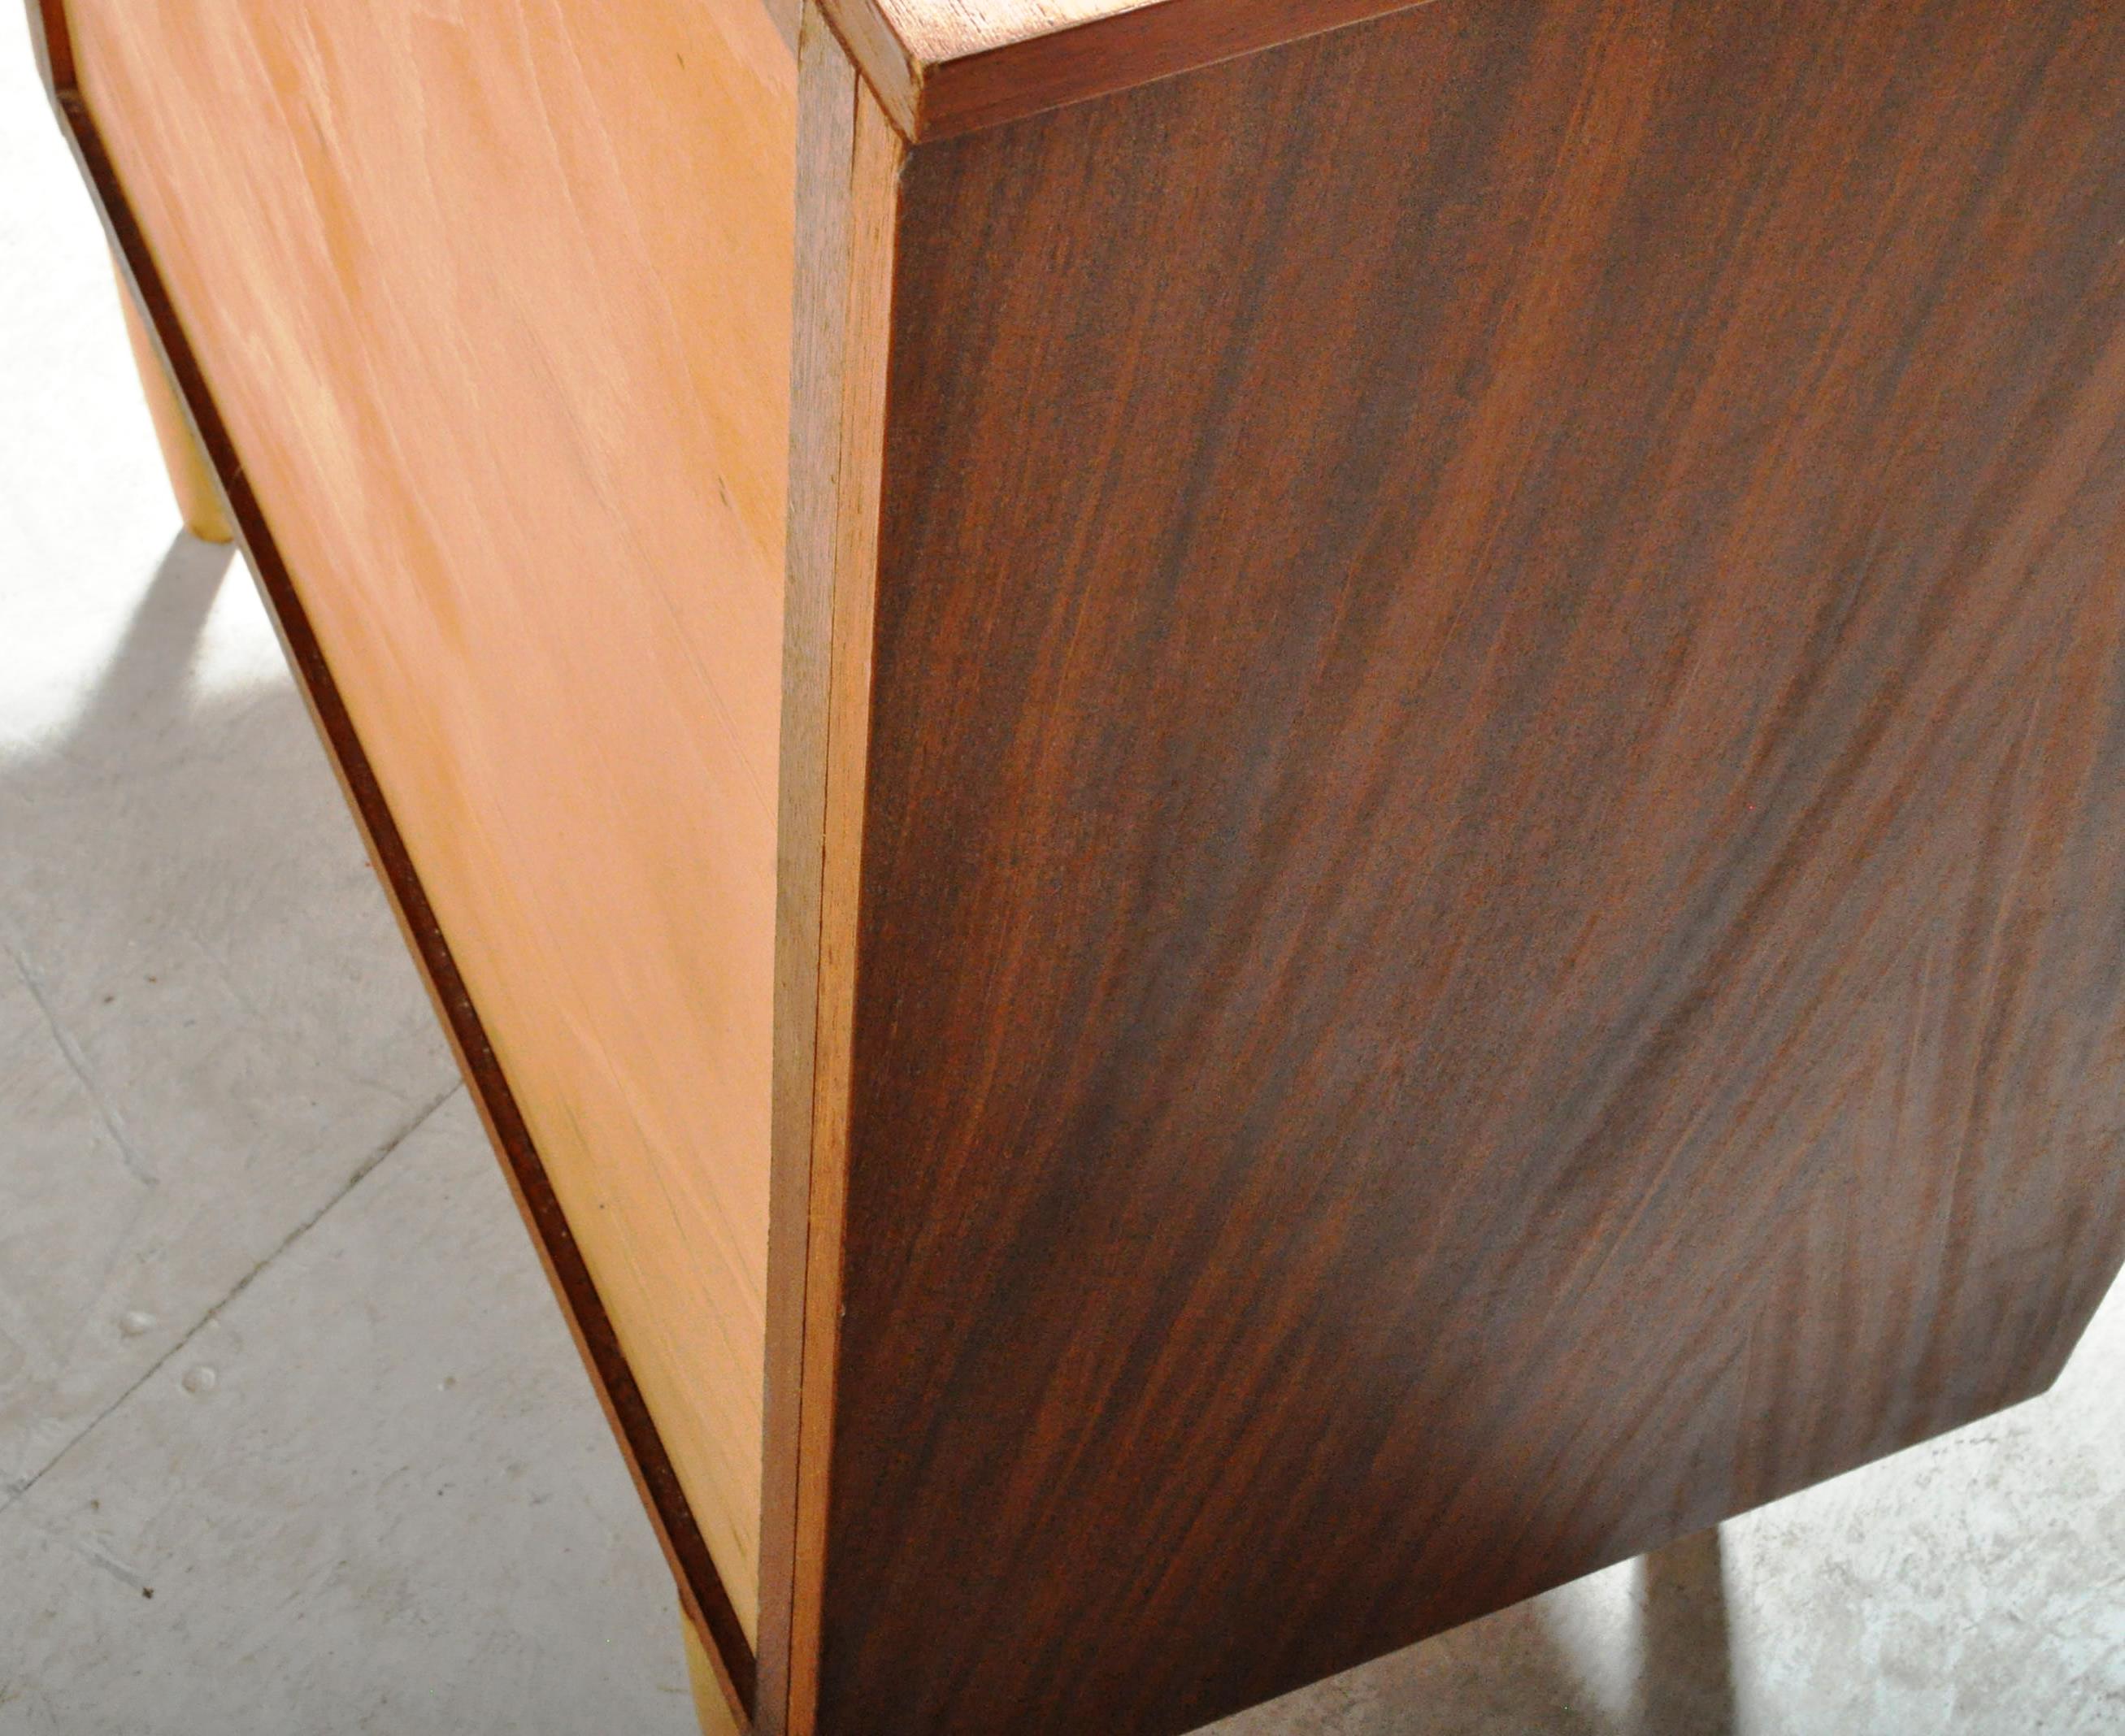 JENTIQUE - MID 20TH CENTURY TEAK CHEST OF DRAWERS - Image 7 of 8